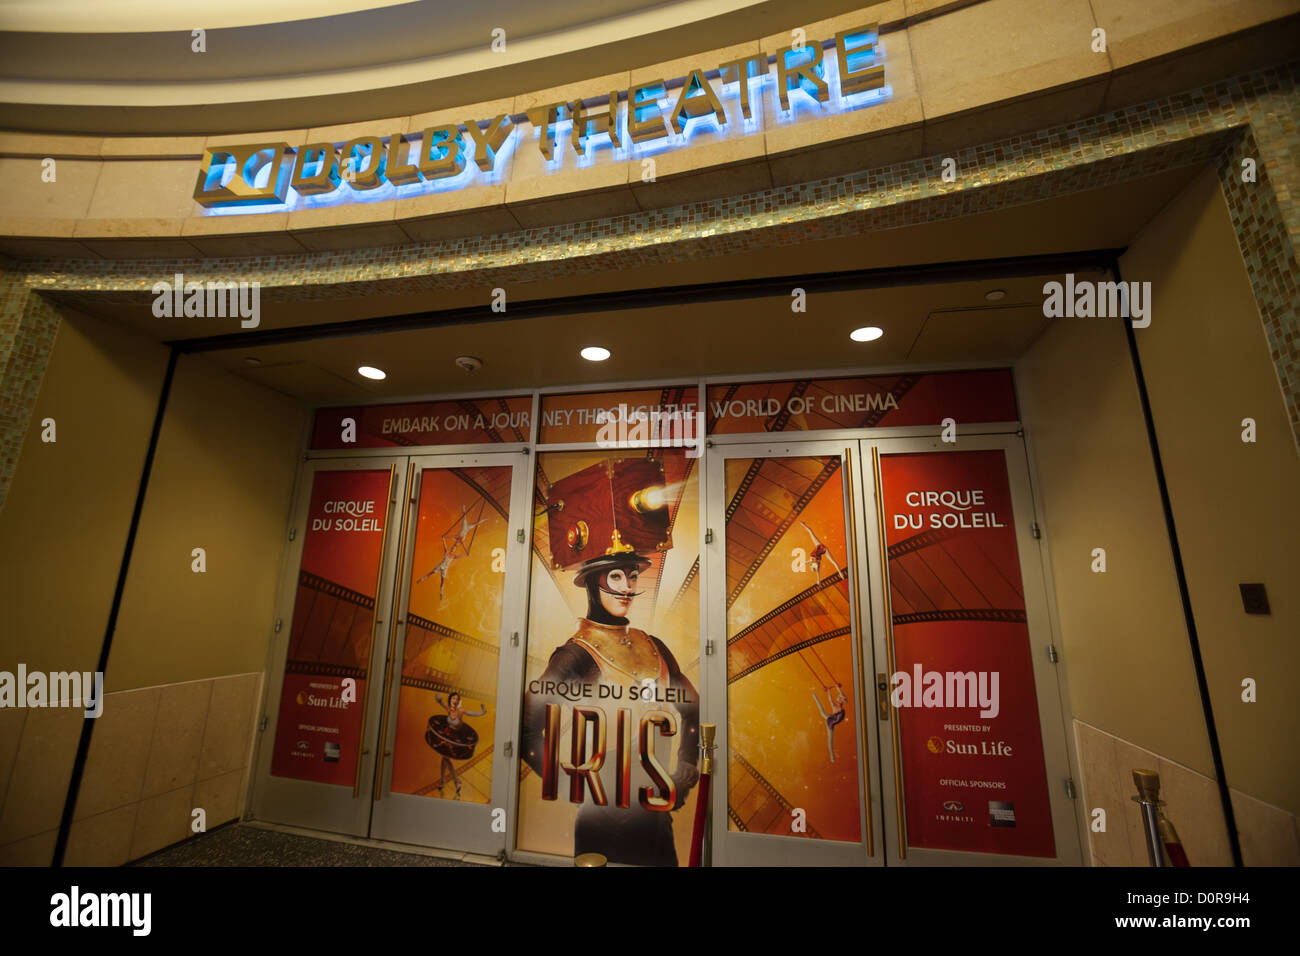 Dolby Theatre (formerly Kodak Theatre) at Hollywood & Highland Center in Hollywood, Los Angeles, CA Stock Photo